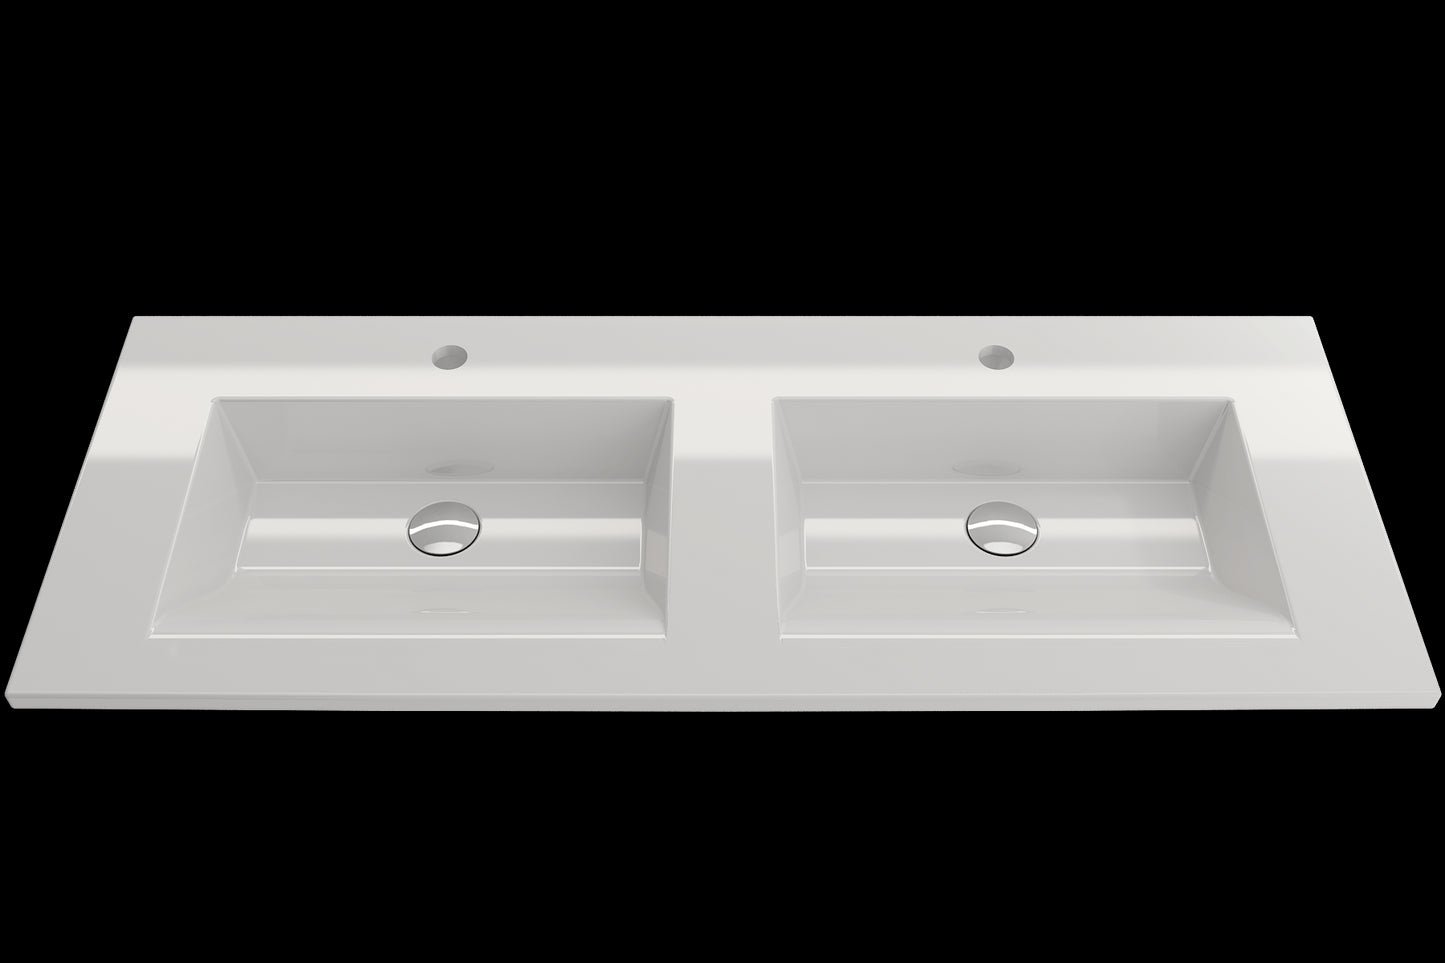 BOCCHI RAVENNA 48" Wall-Mounted Sink Fireclay Double Bowl For Two 1-Hole Faucets With Overflows